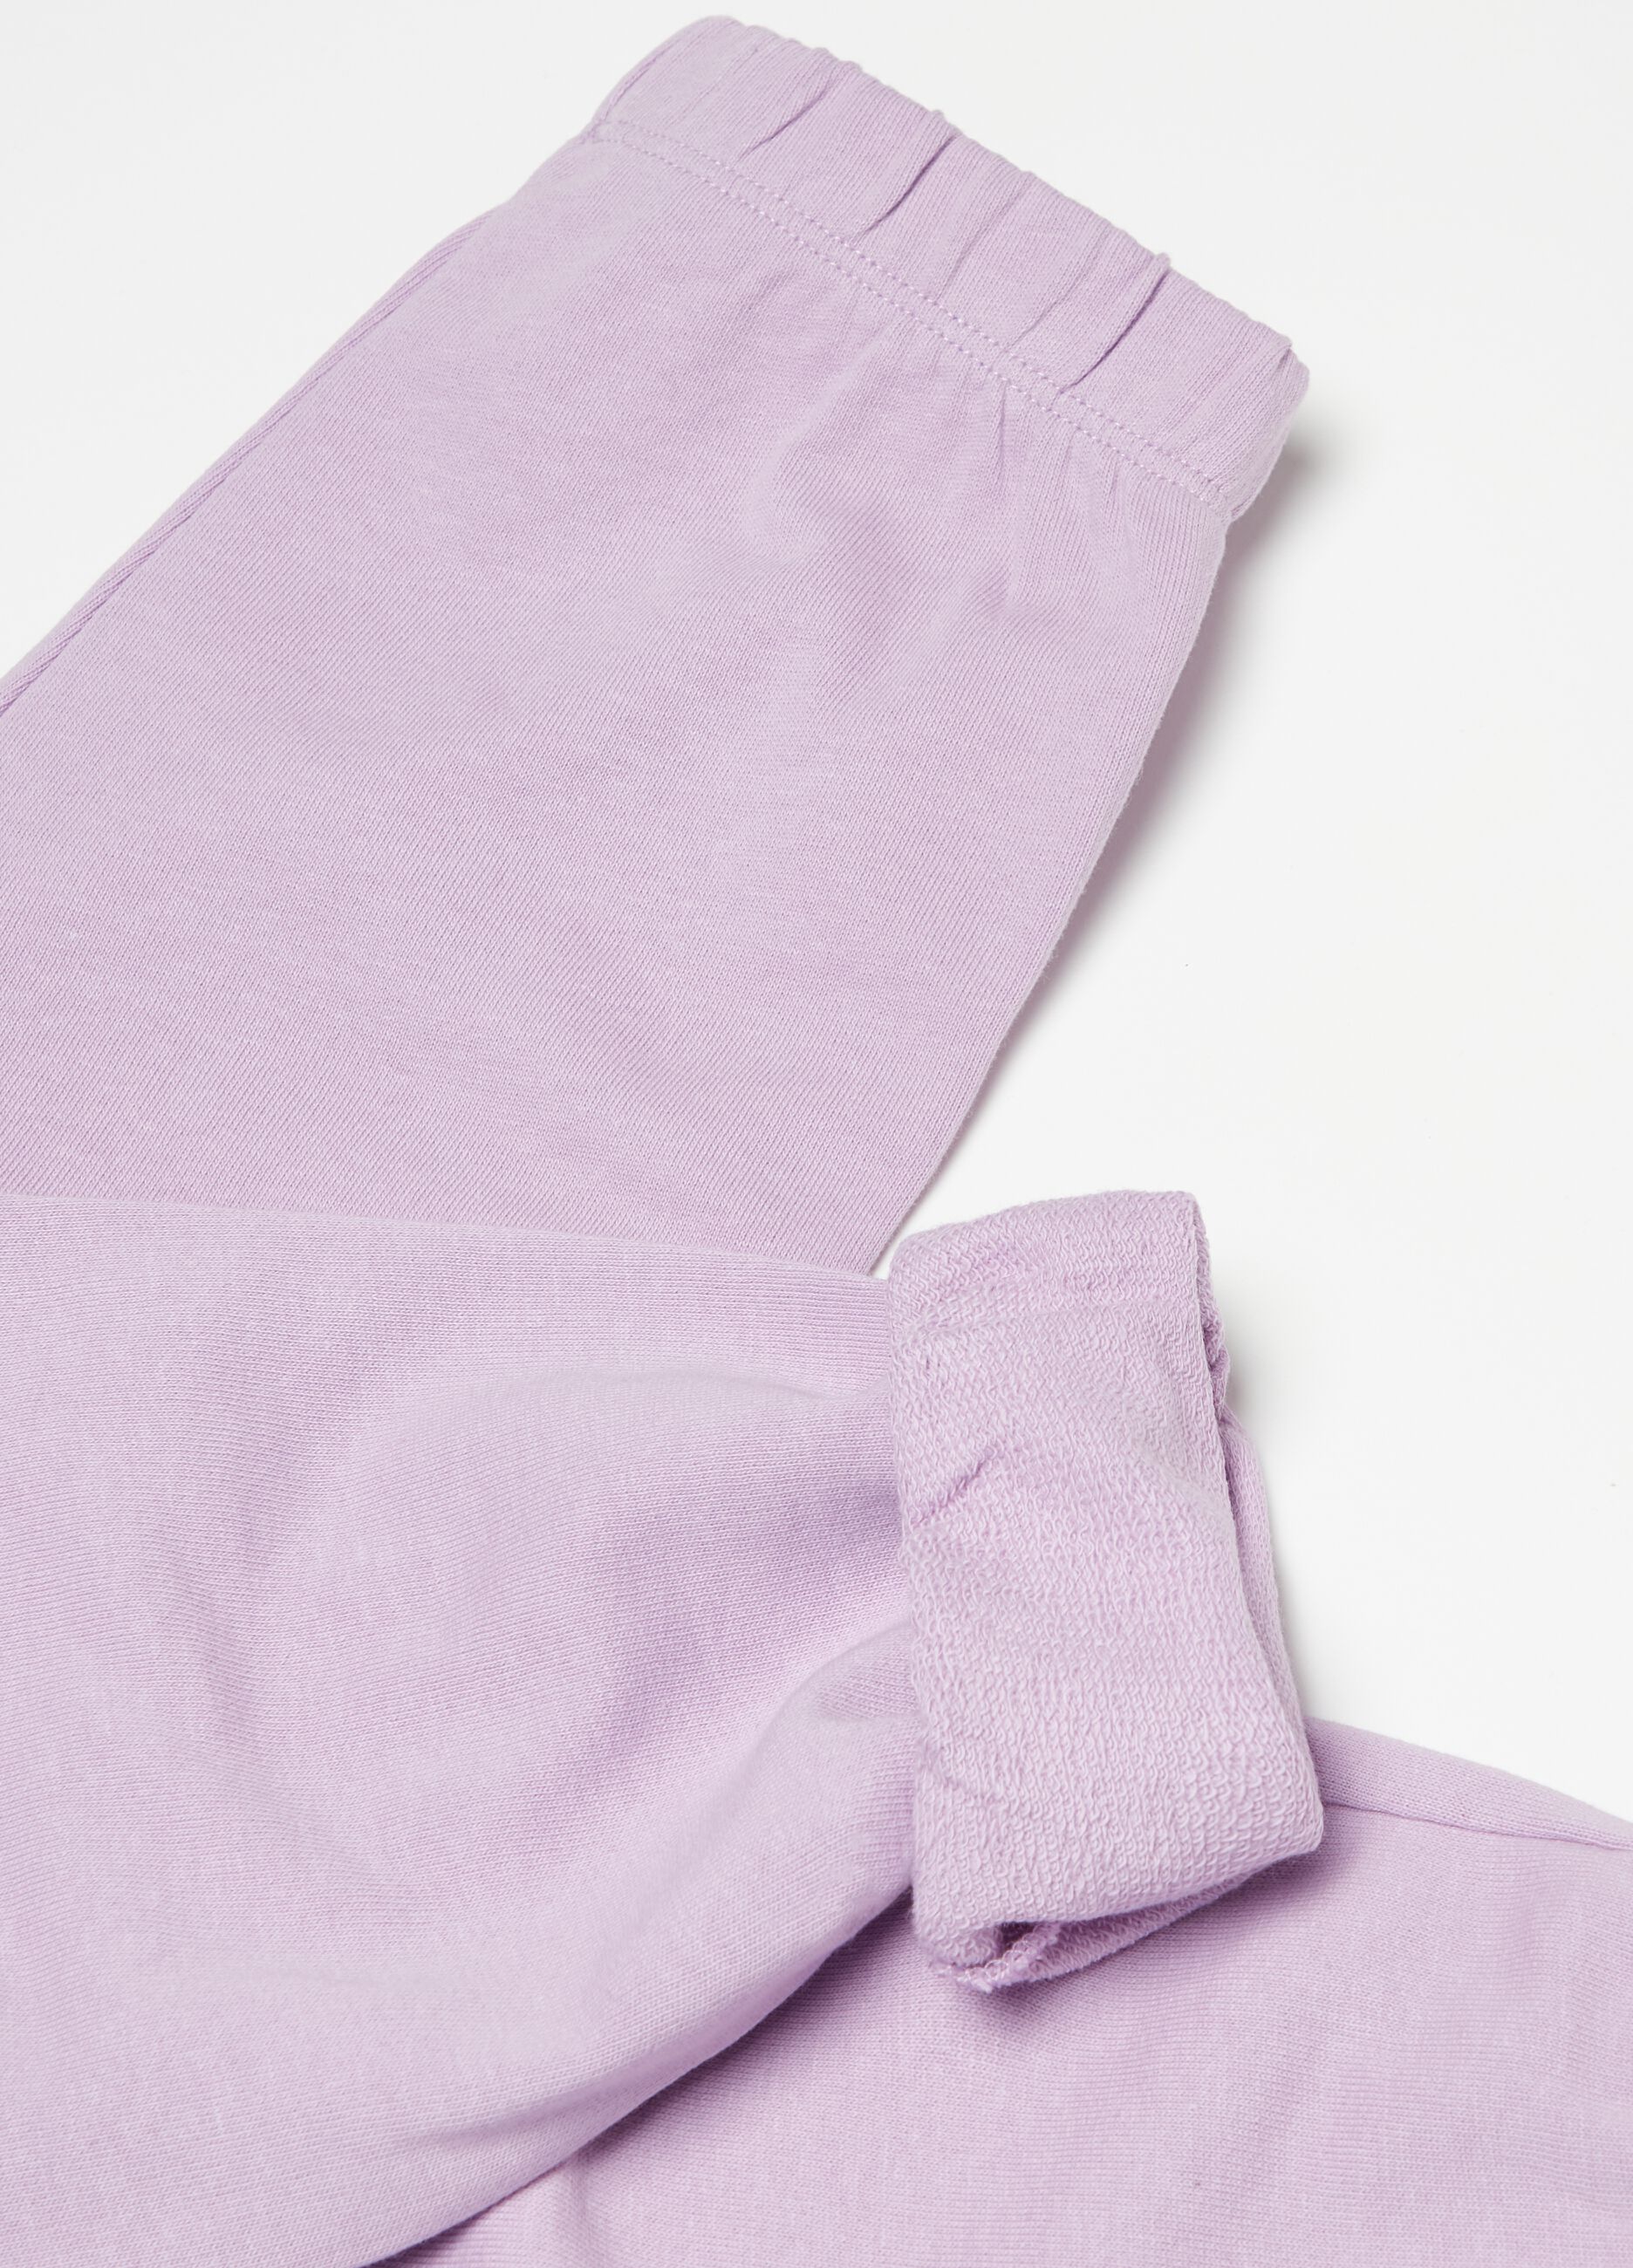 Plush joggers with elasticated trims